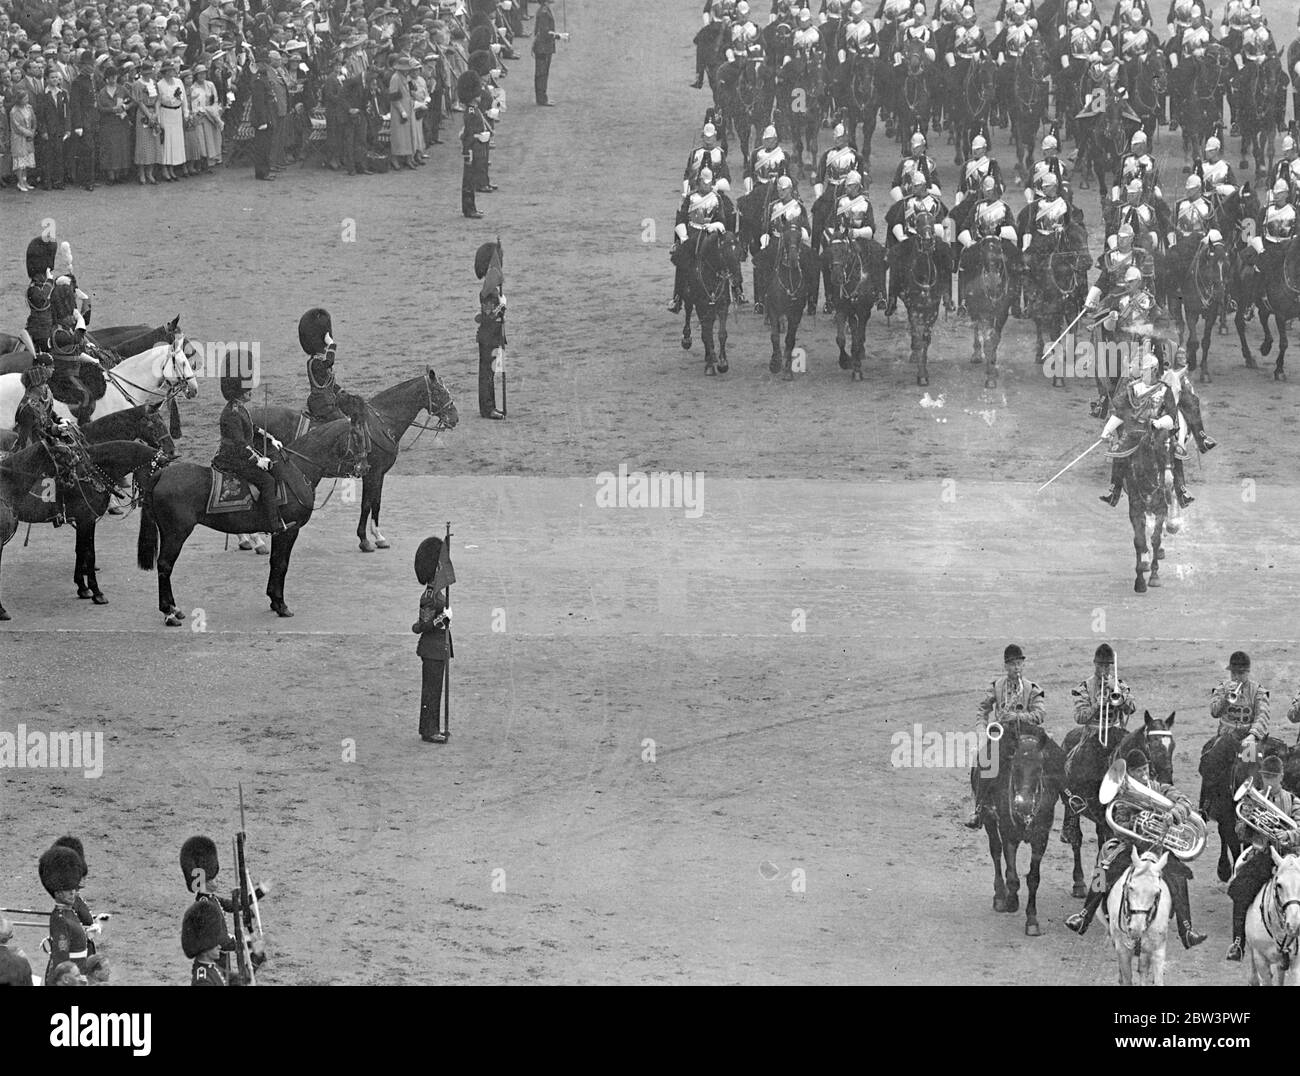 King At First Trooping Of The Colour As Monarch For the first time as monarch King Edward VIII took part in the Trooping of the Colour ceremony at the Horse Guards Parade in honour of his 42 nd birthday . His Brother the Duke of York , The Royal Dukes , the military attaches of Foreign Powers and Colonels of the Guards Regiments accompanied him om horseback . Photo Shows : The Horse Guards passing the King who is at the saluting base . 23 Jun 1936 Stock Photo